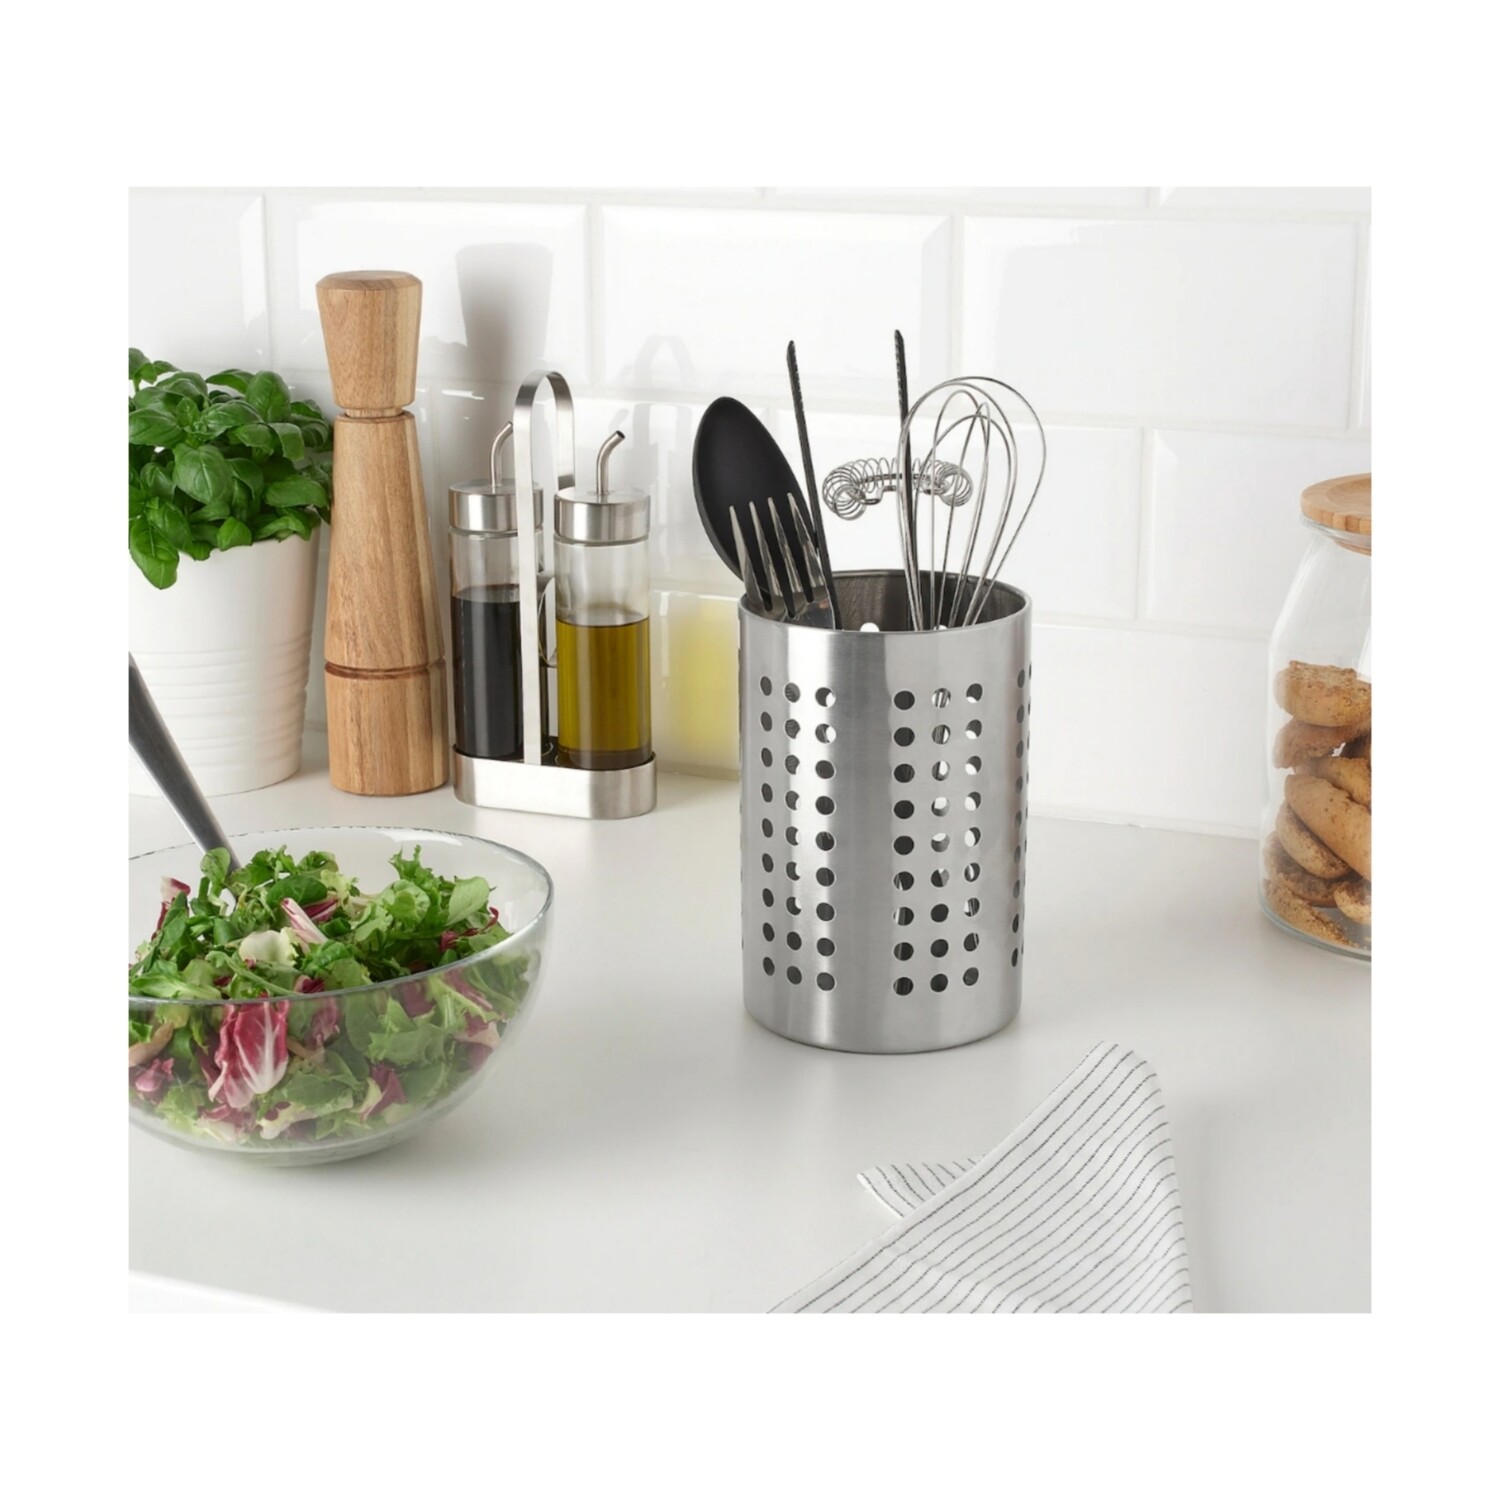 Stainless steel spoon stand - 1 Piece